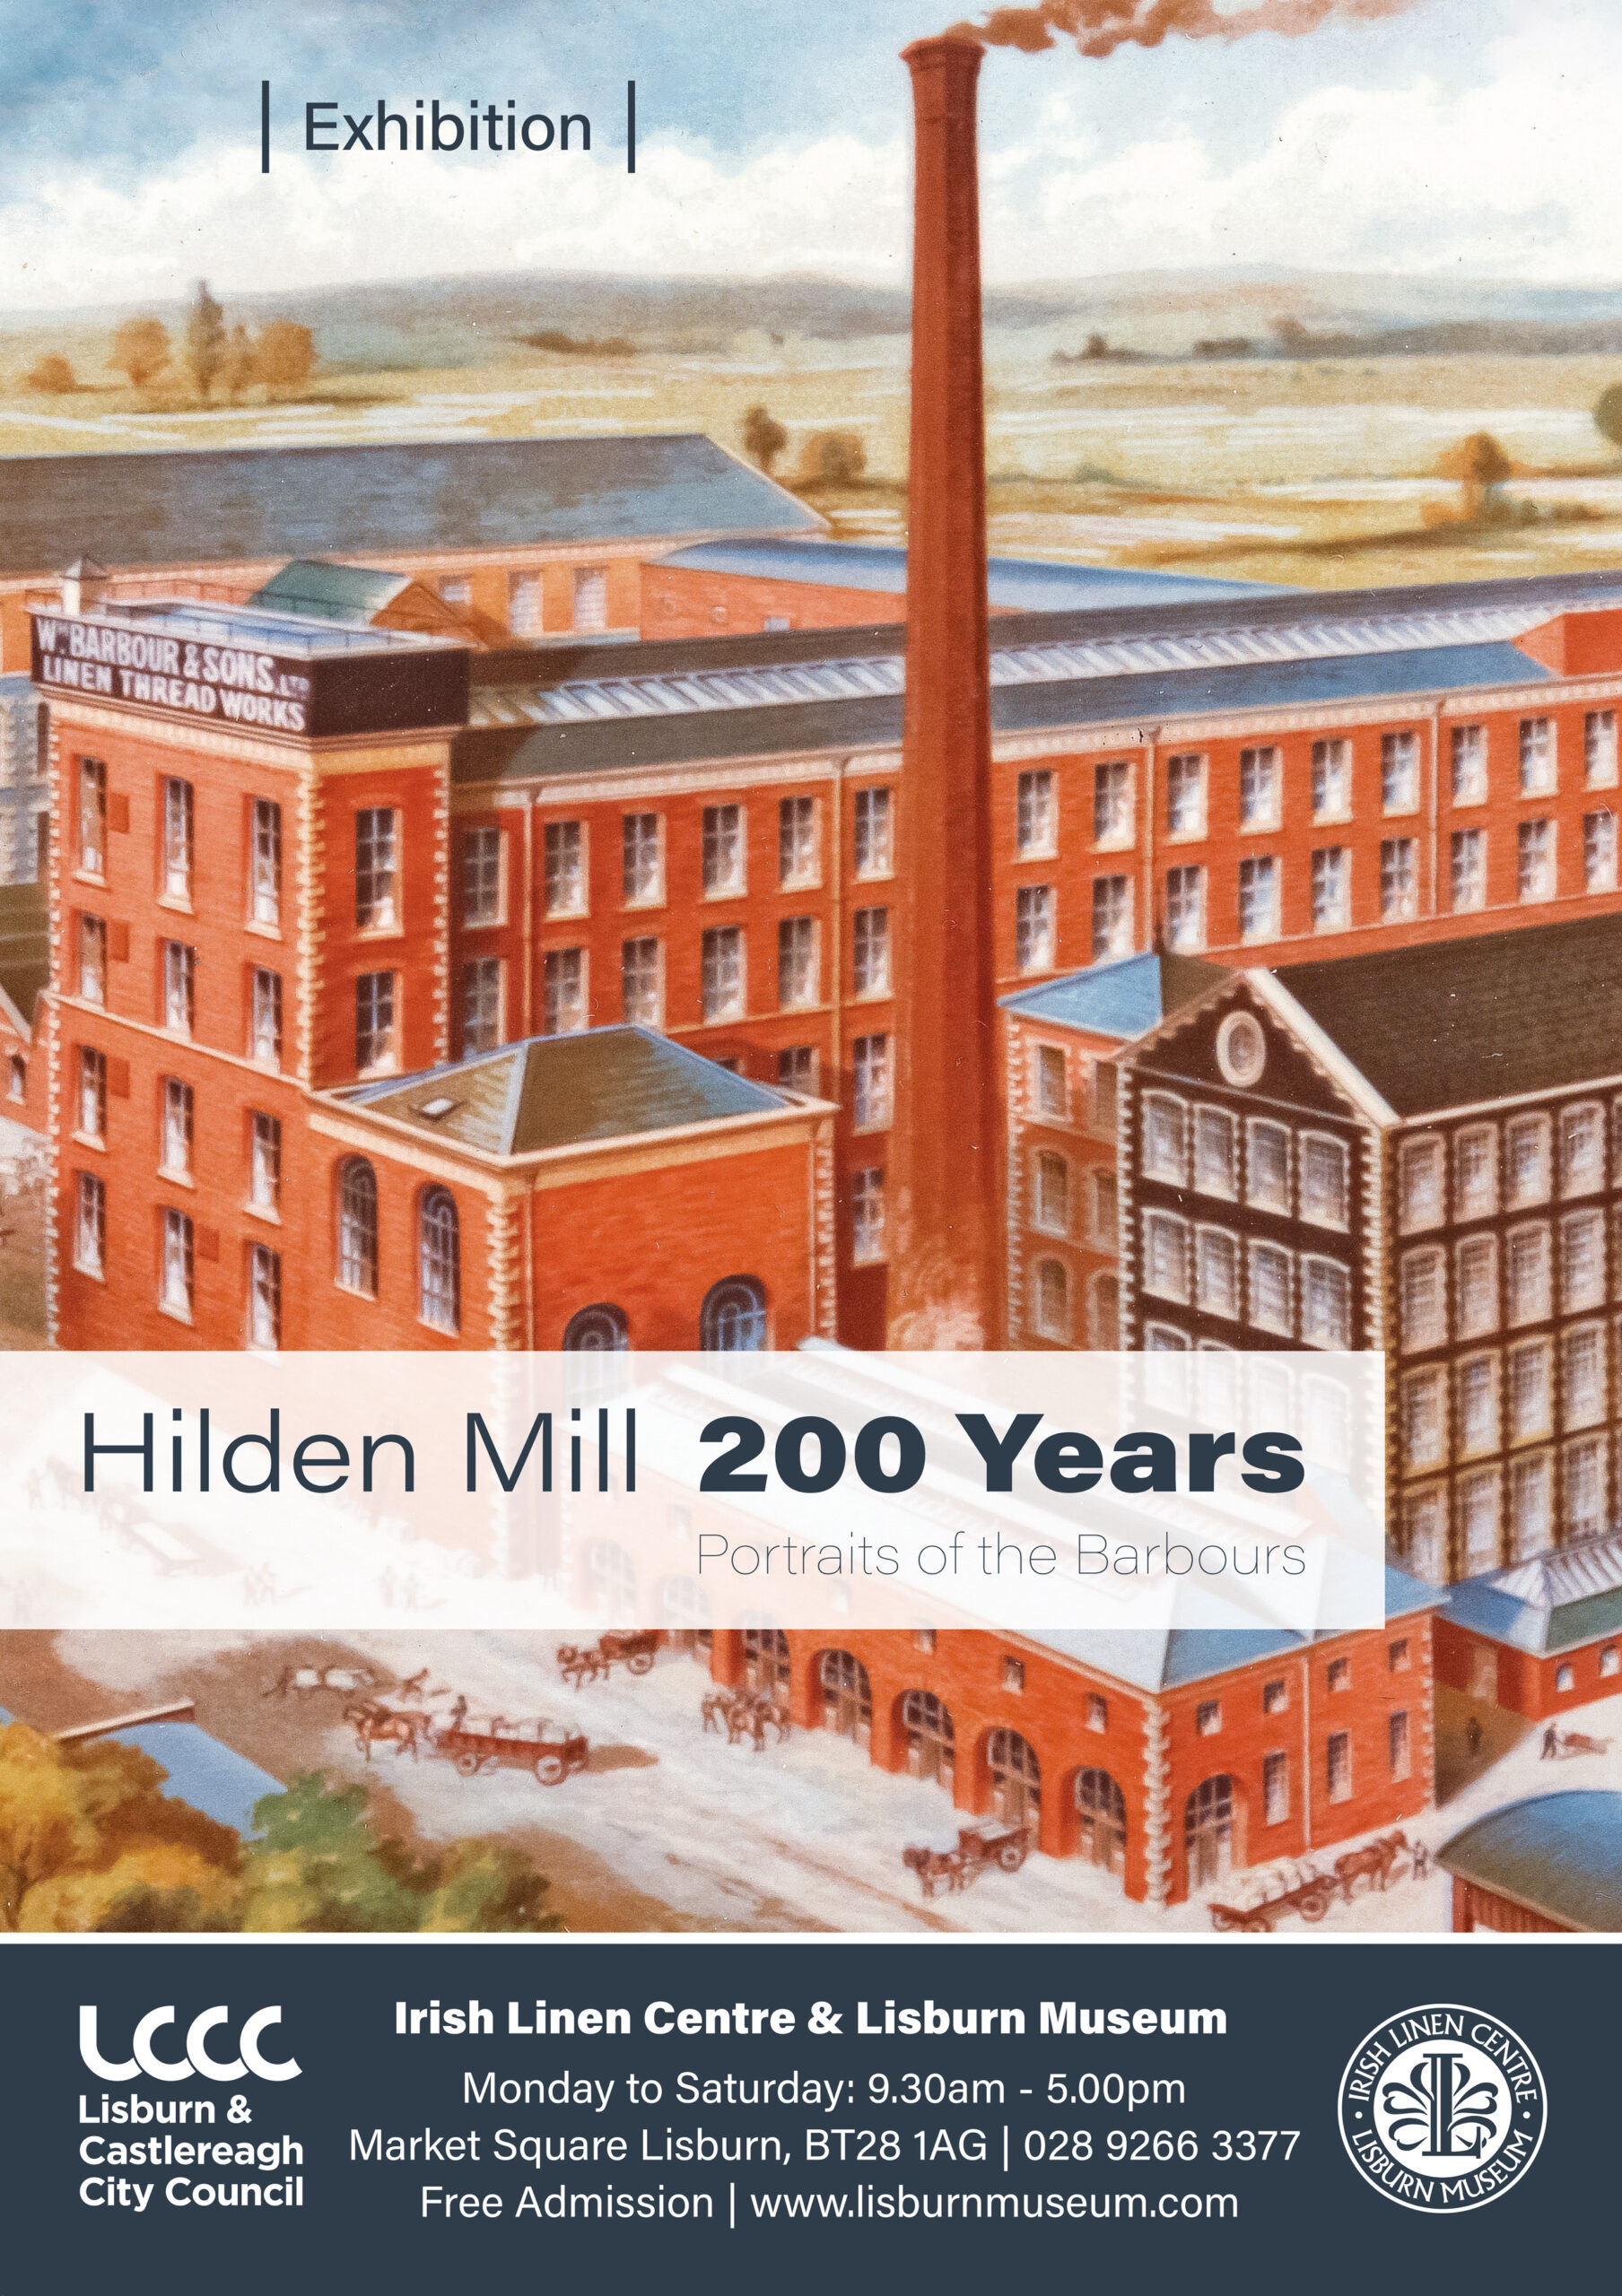 Hilden Mill 200 Years: Portraits of the Barbours.